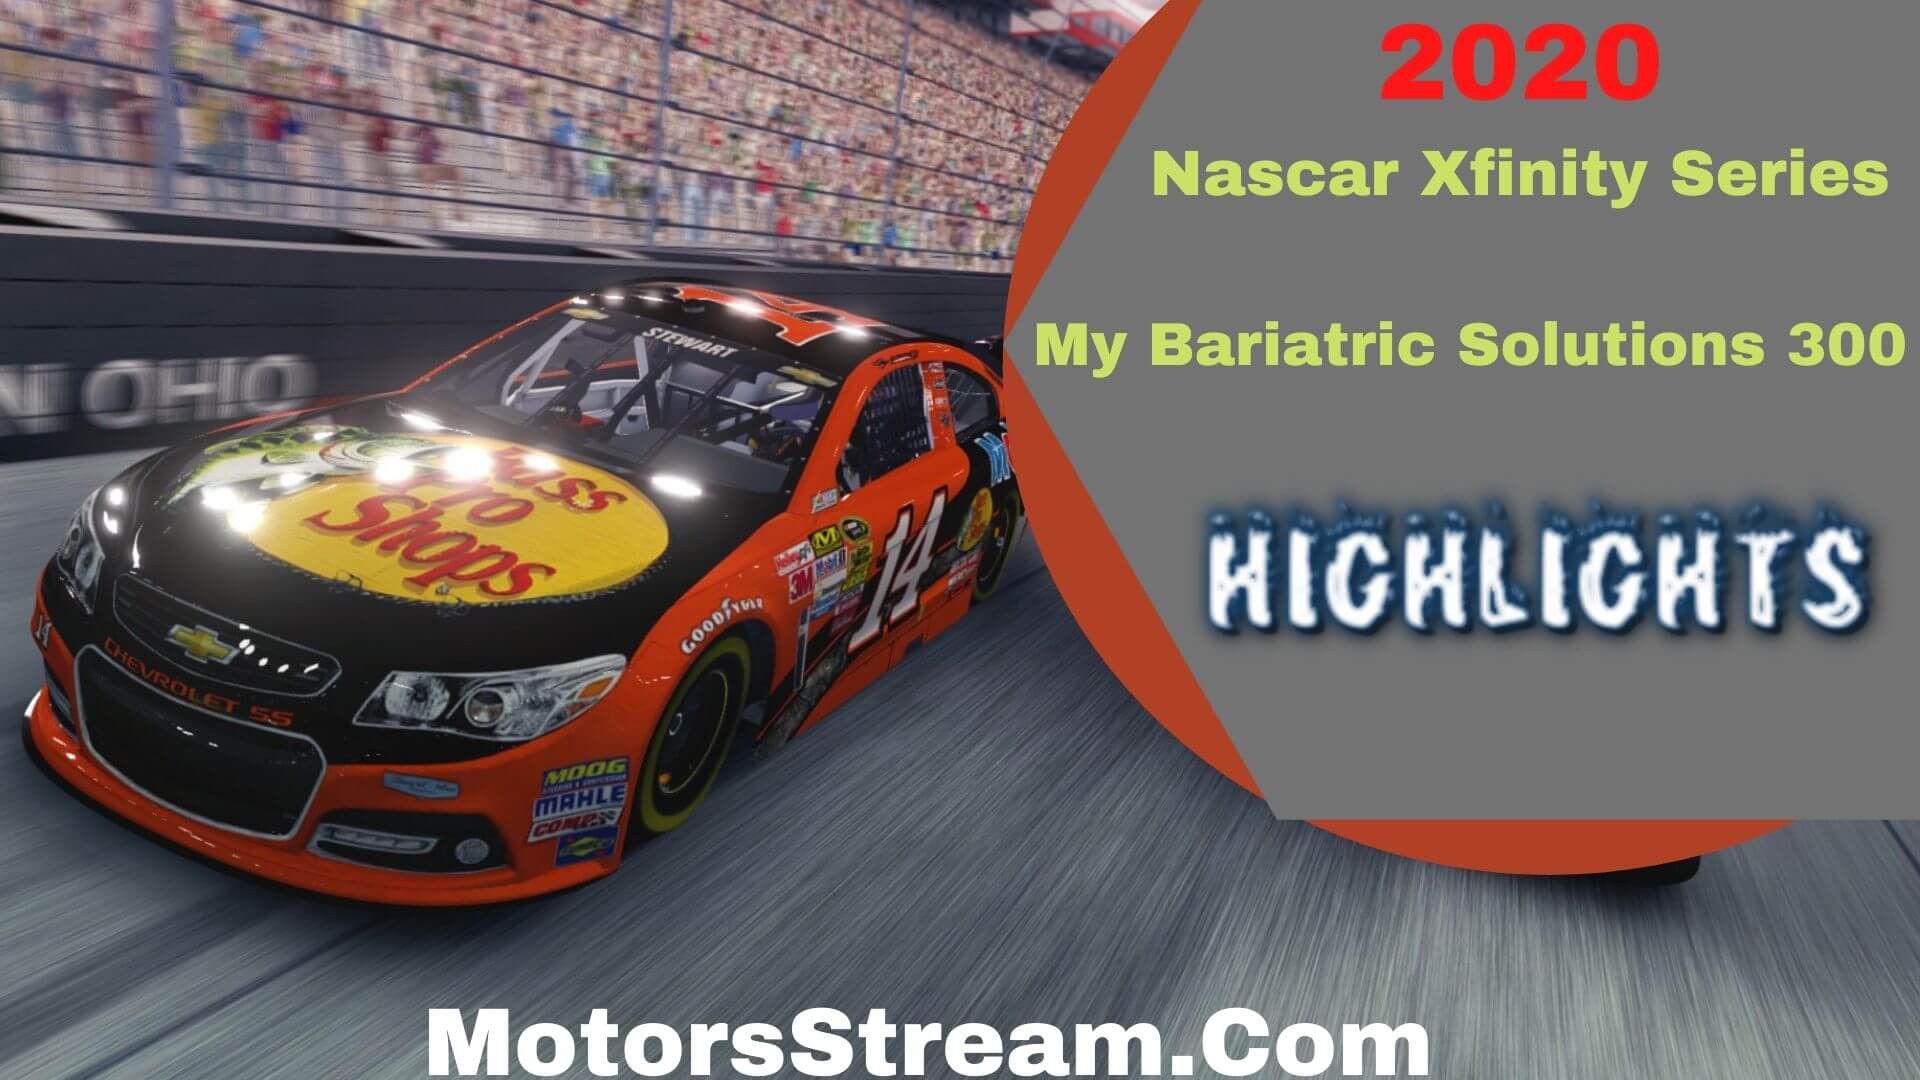 My Bariatric Solutions 300 Highlights 2020 | Xfinity Series